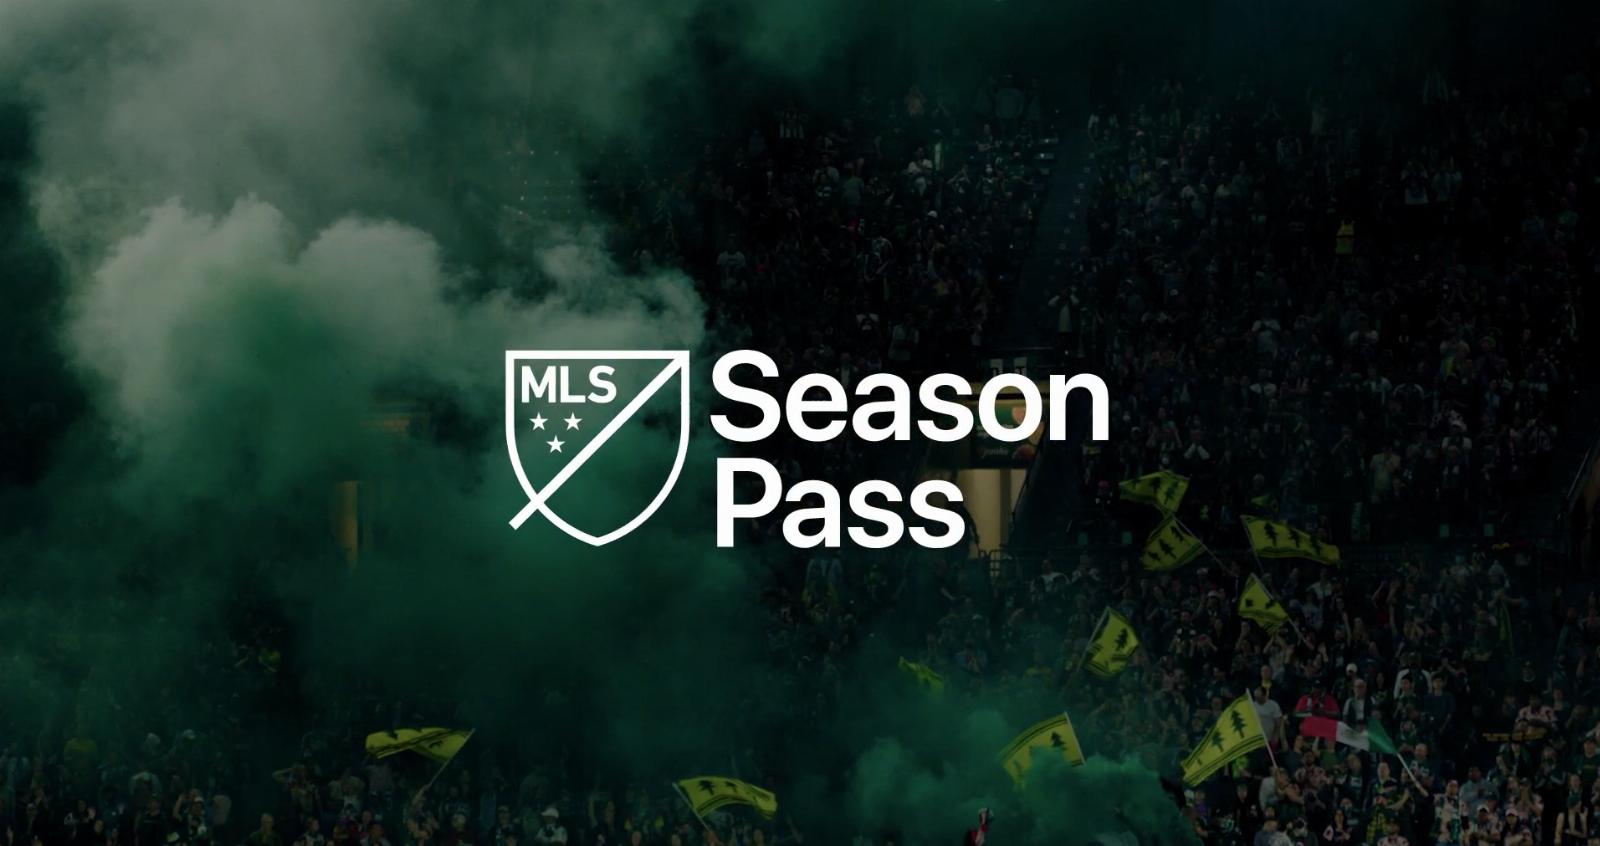 Apple TV users can now watch Major League Soccer matches with MLS Season Pass